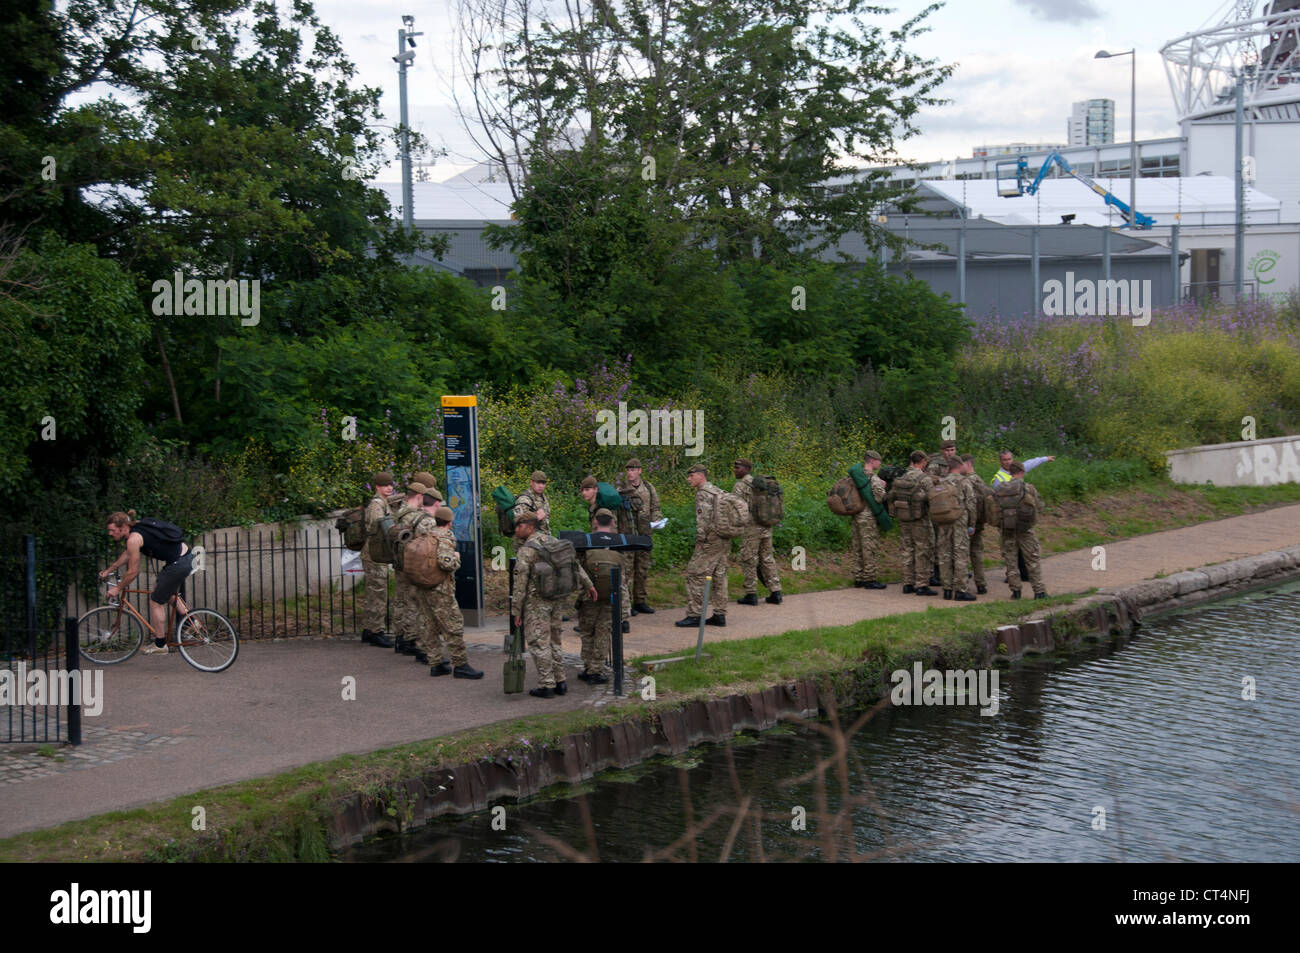 Army soldiers on patrol at closed canal path, Hackney Stock Photo